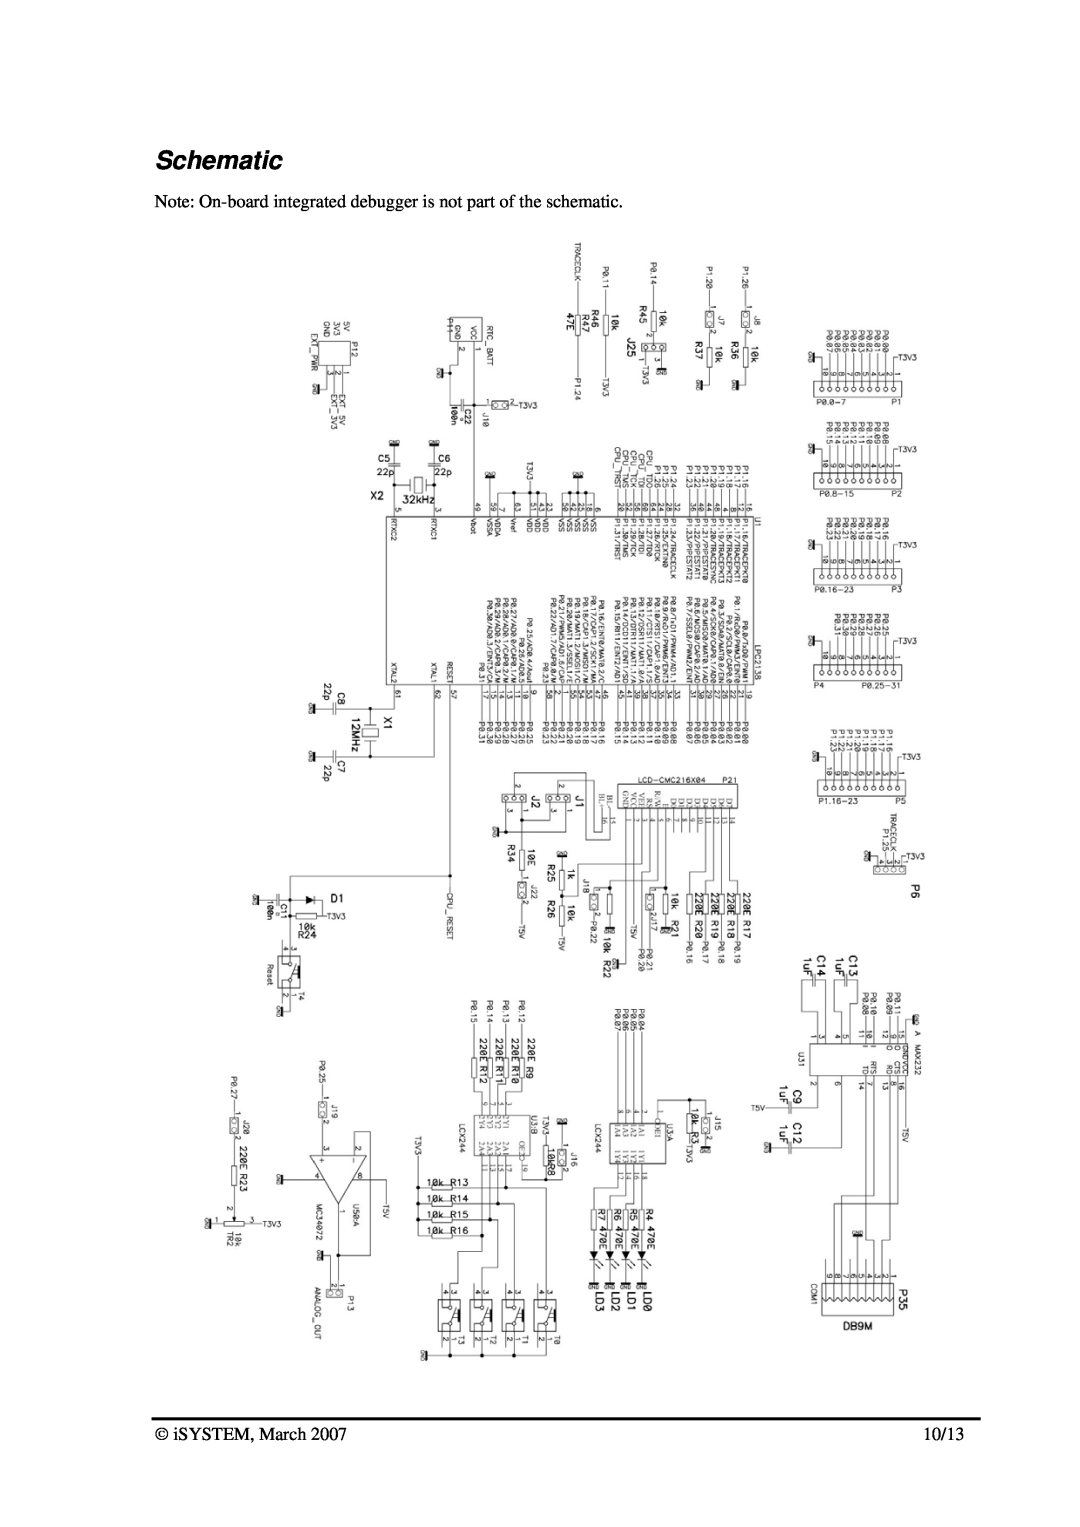 Philips LPC2138 dimensions Schematic, iSYSTEM, March, 10/13 